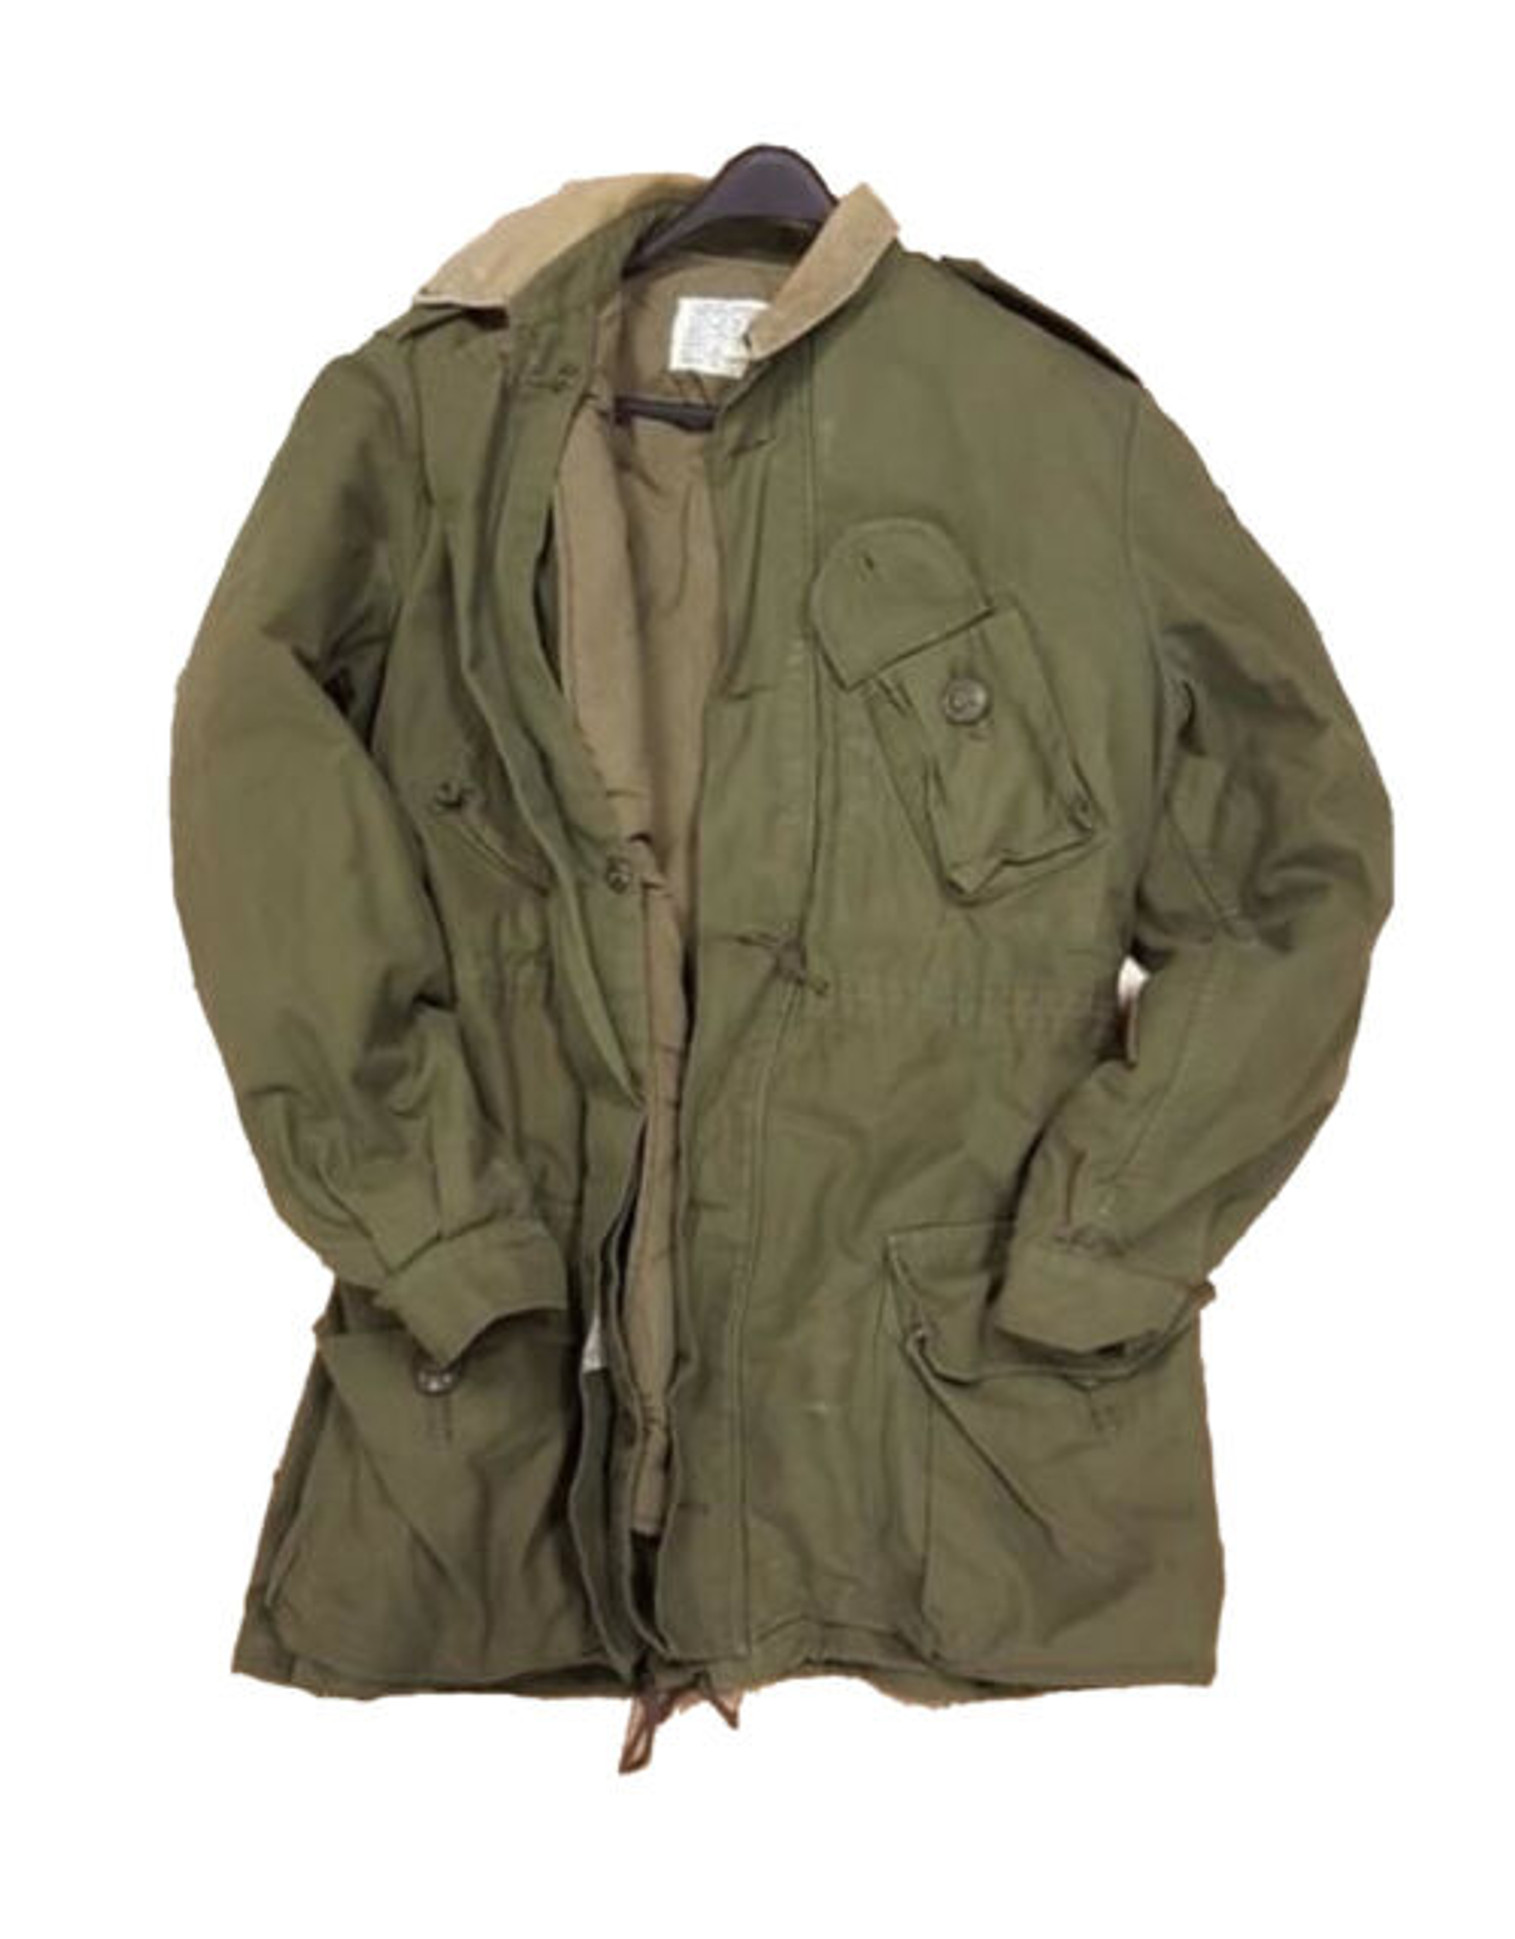 Canadian Armed Forces 3 Season Combat Jacket w/Liner - Corduroy Collar 